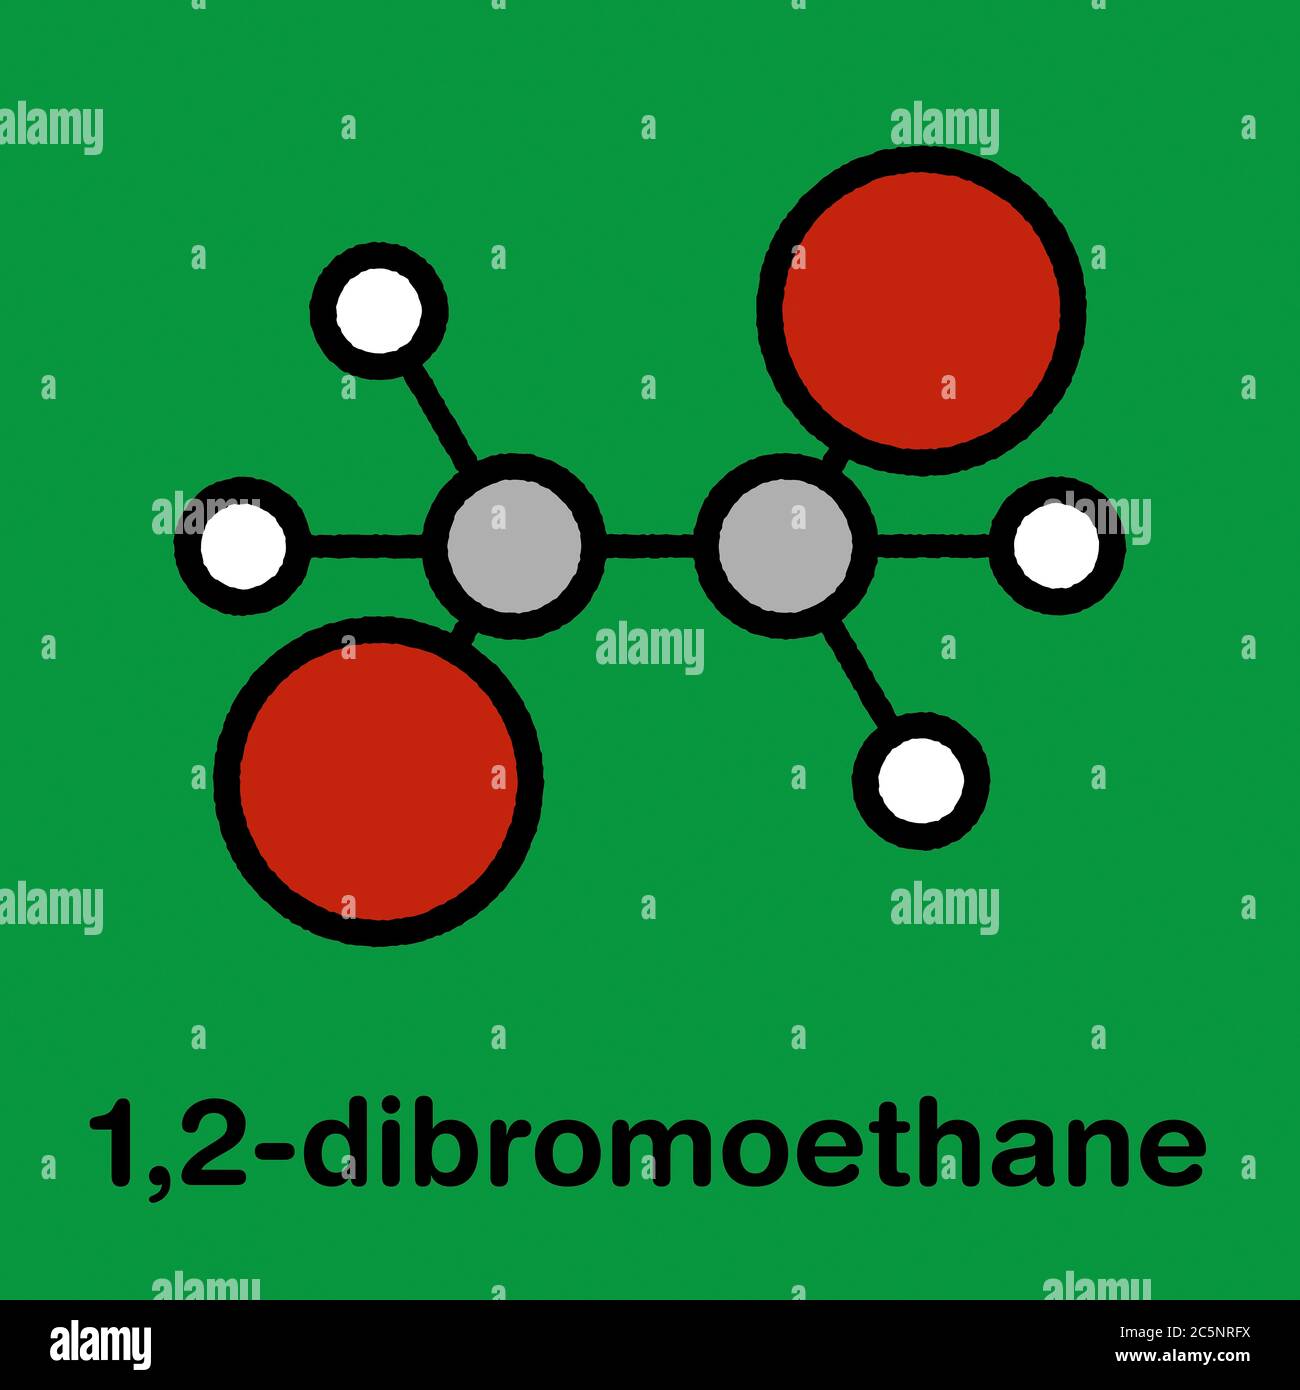 Ethylene dibromide (EDB, 1,2-dibromoethane) fumigant molecule. Stylized skeletal formula (chemical structure): Atoms are shown as color-coded circles: hydrogen (white), carbon (grey), bromine (brown). Stock Photo